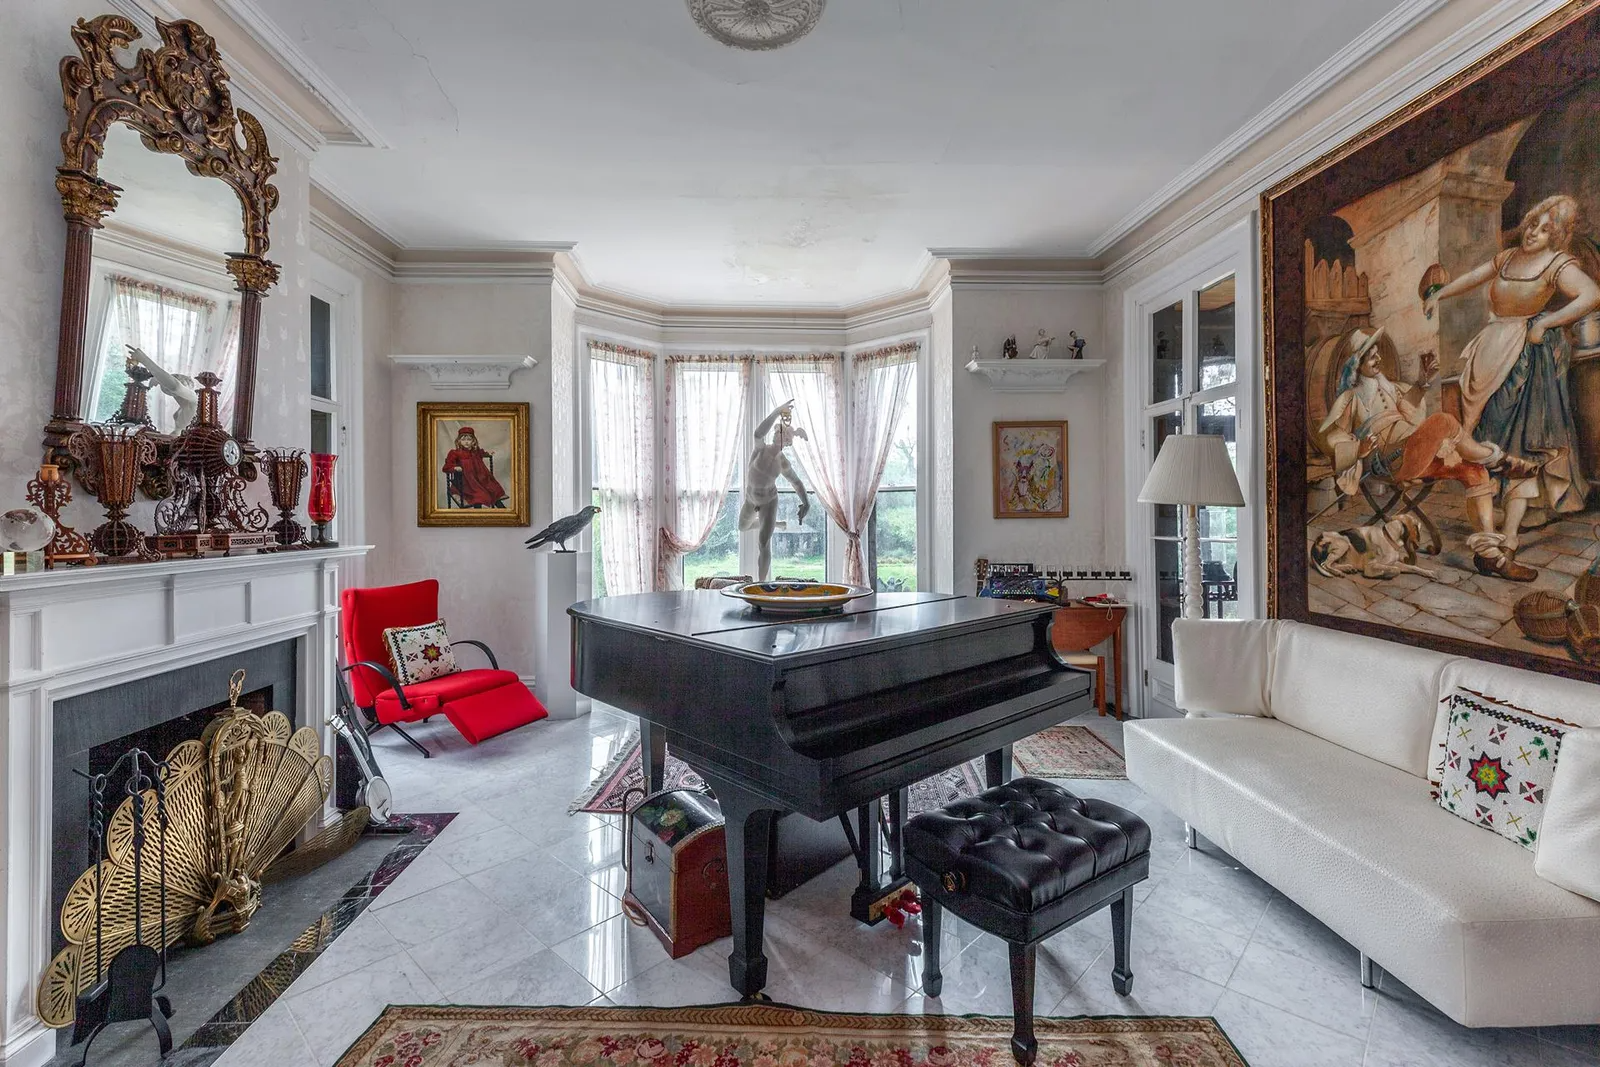 music room with tiled floor and white mantel